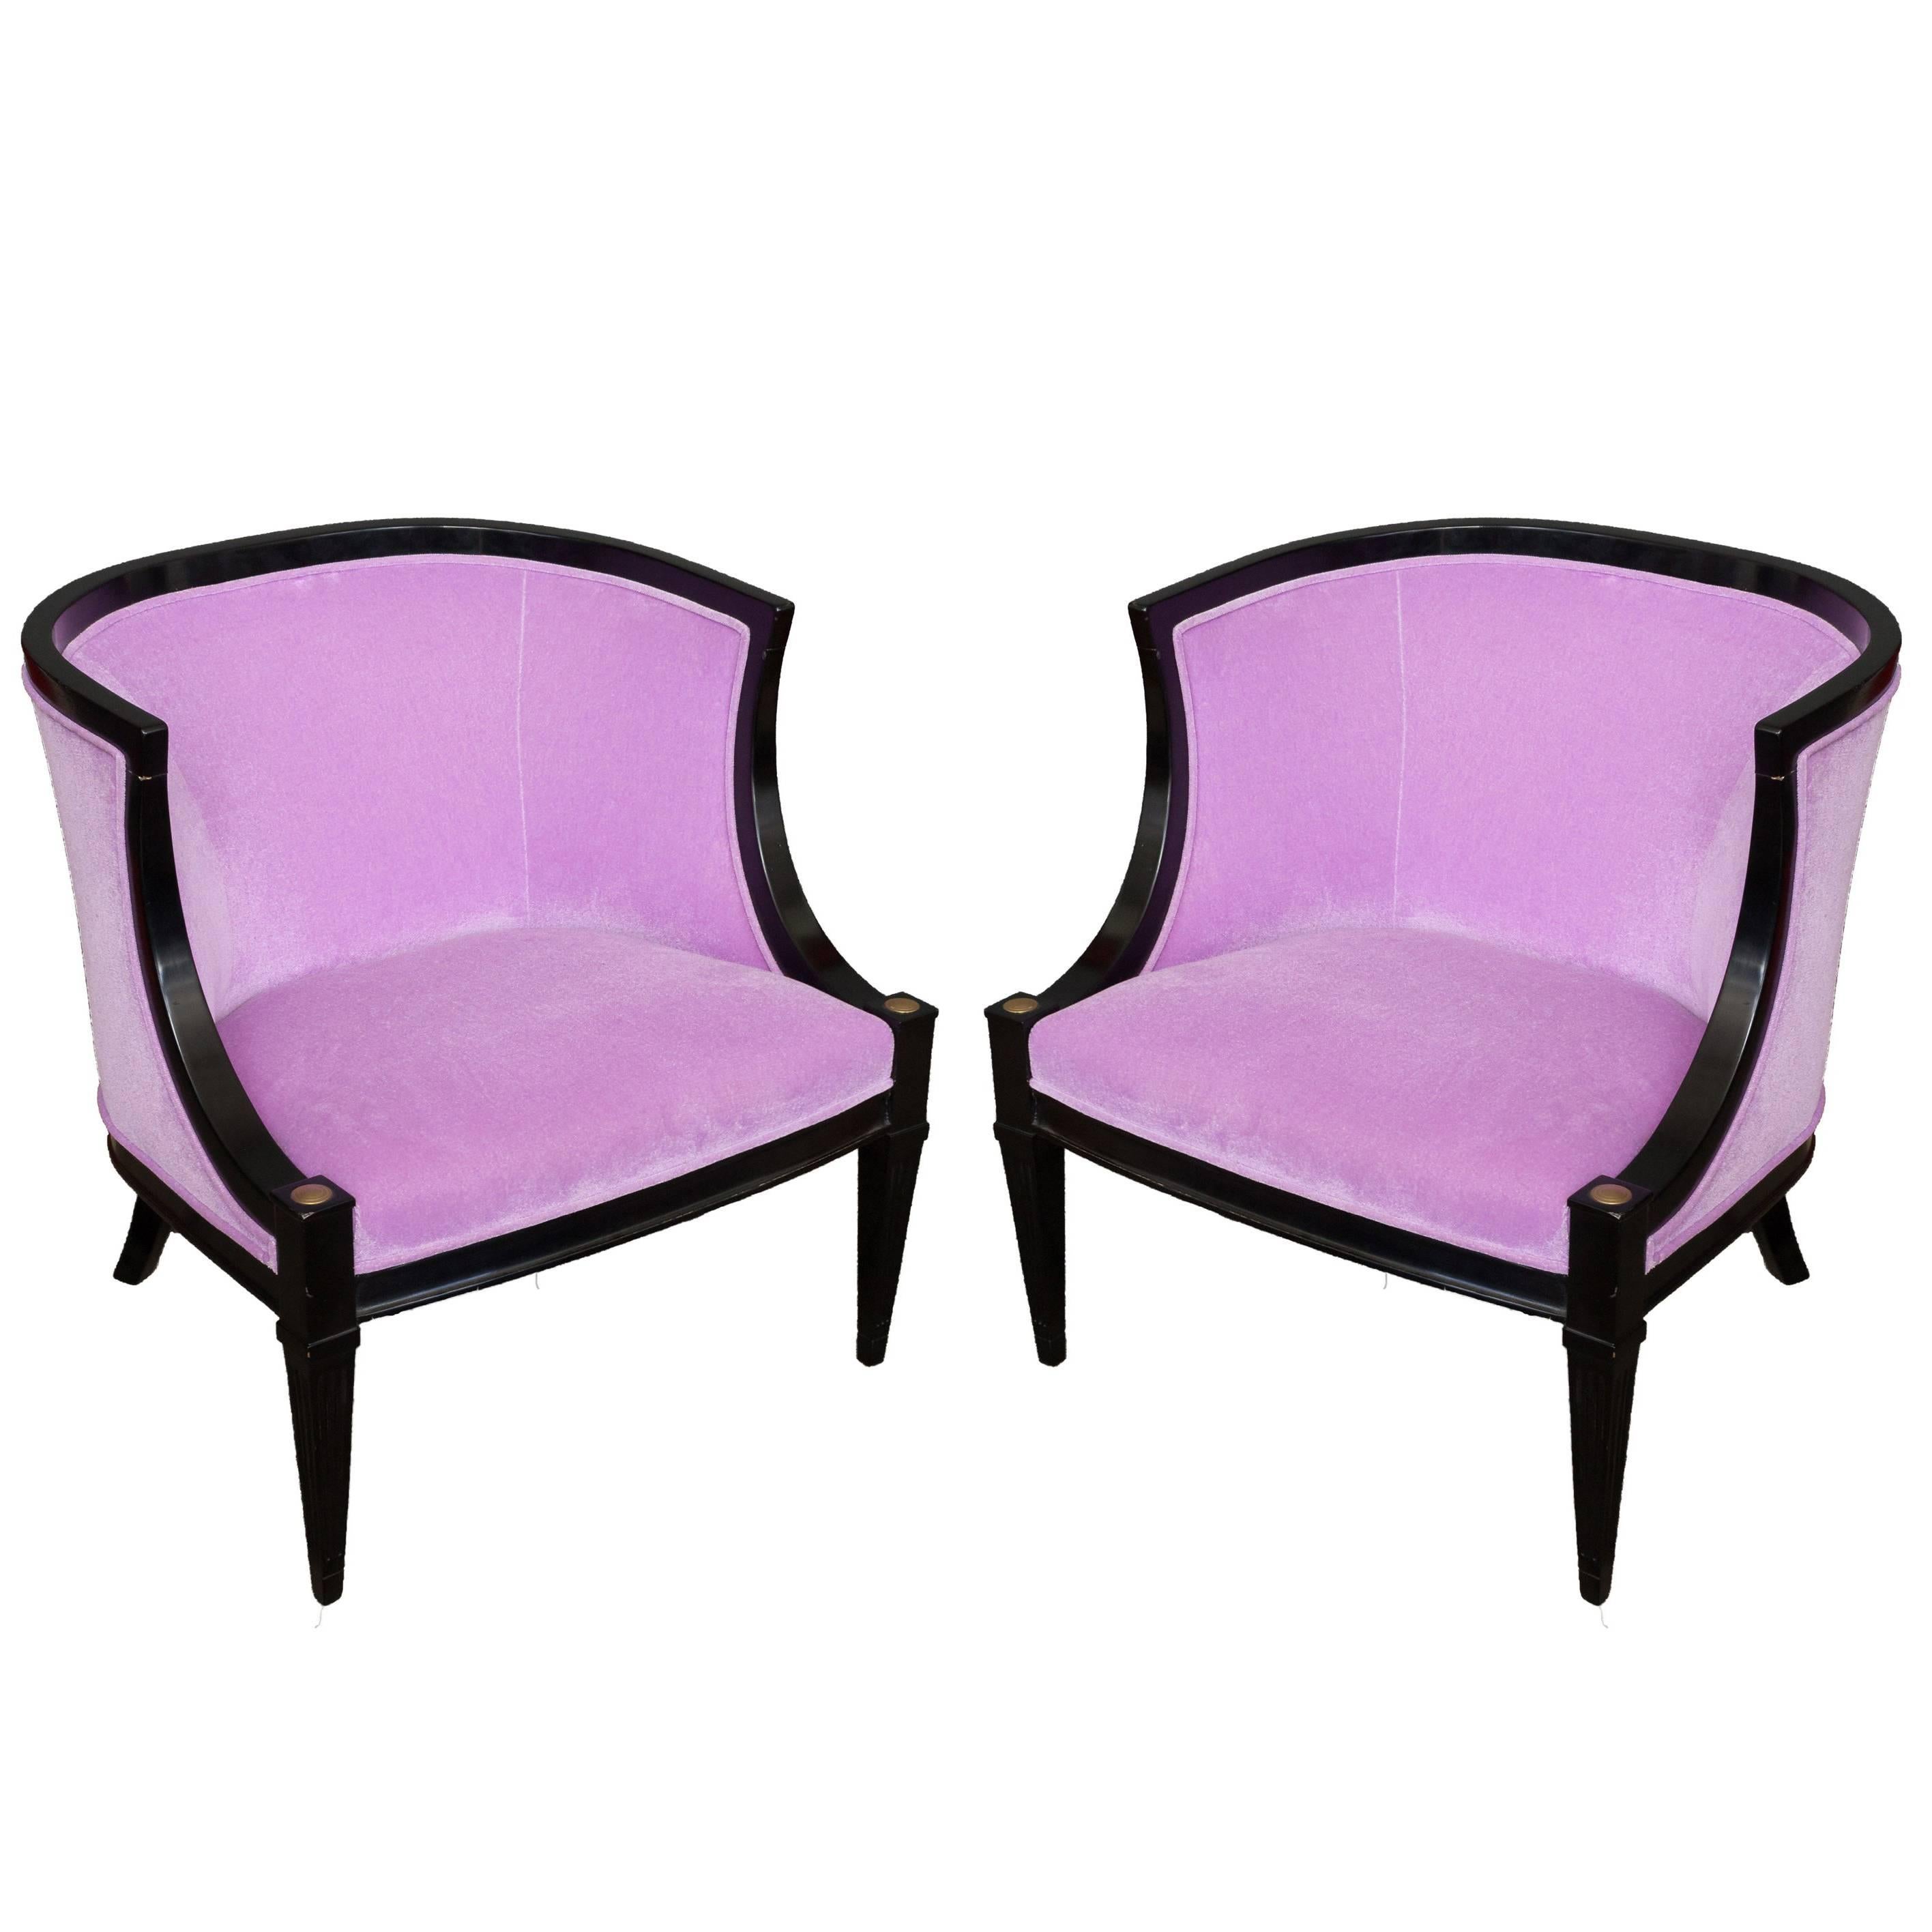 A stunning pair of American 1950s mid century armchairs in lavender velvet. Experience true luxury and elegance with this magnificent pair of rounded back armchairs. Handcrafted in American mid century 50s style, they have been recently ebonized,